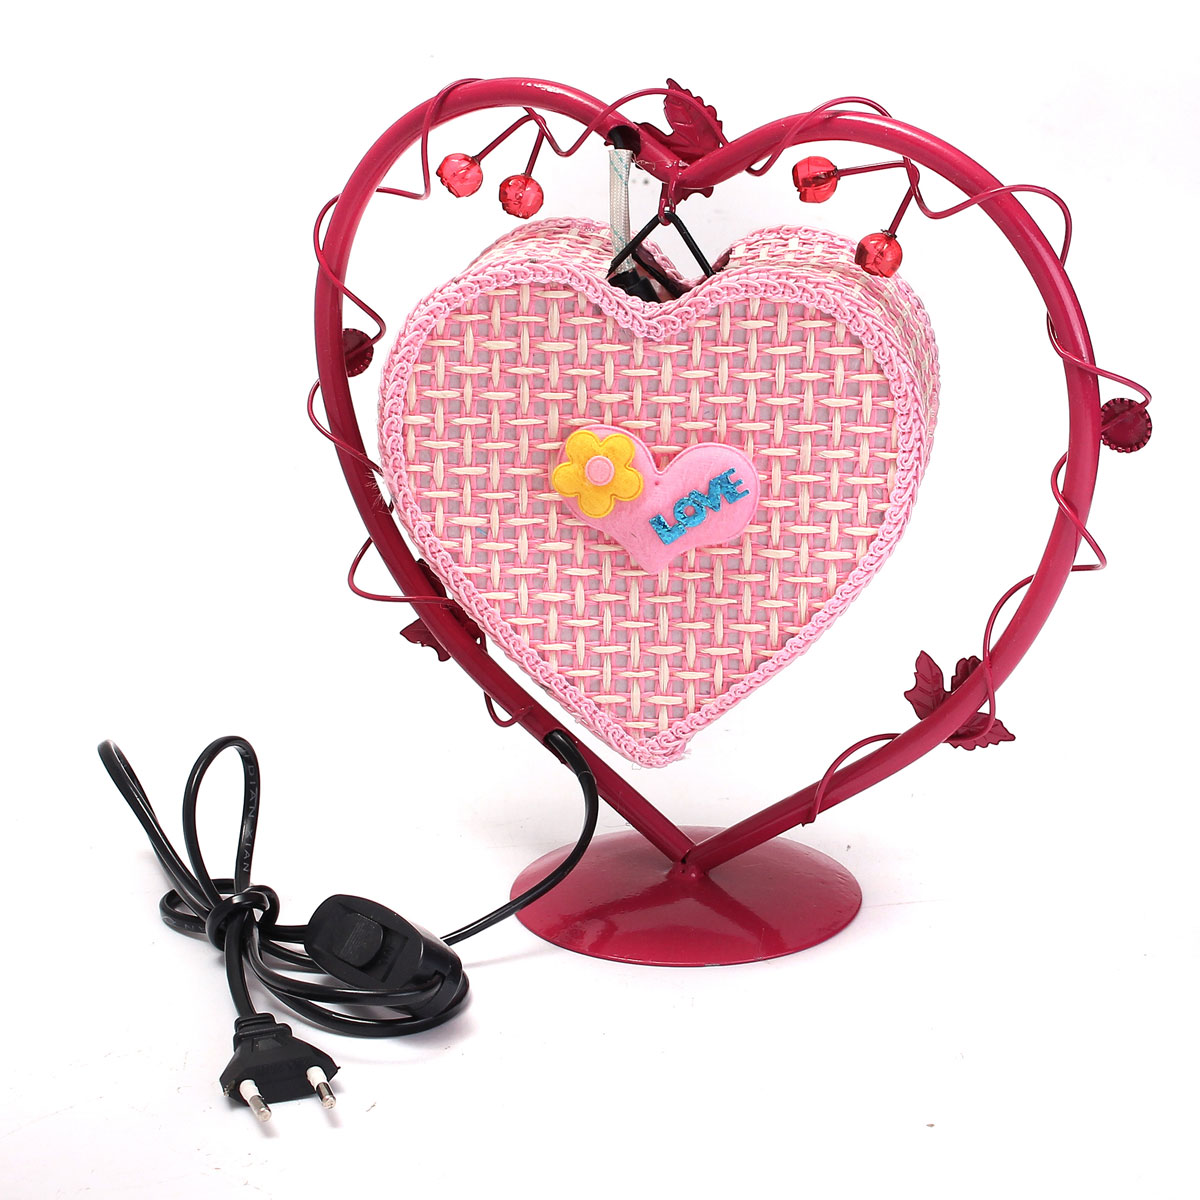 Vintage-Artificial-Light-Love-Heart-Antique-Table-Lamp-Gift-Room-Decor-1073319-7